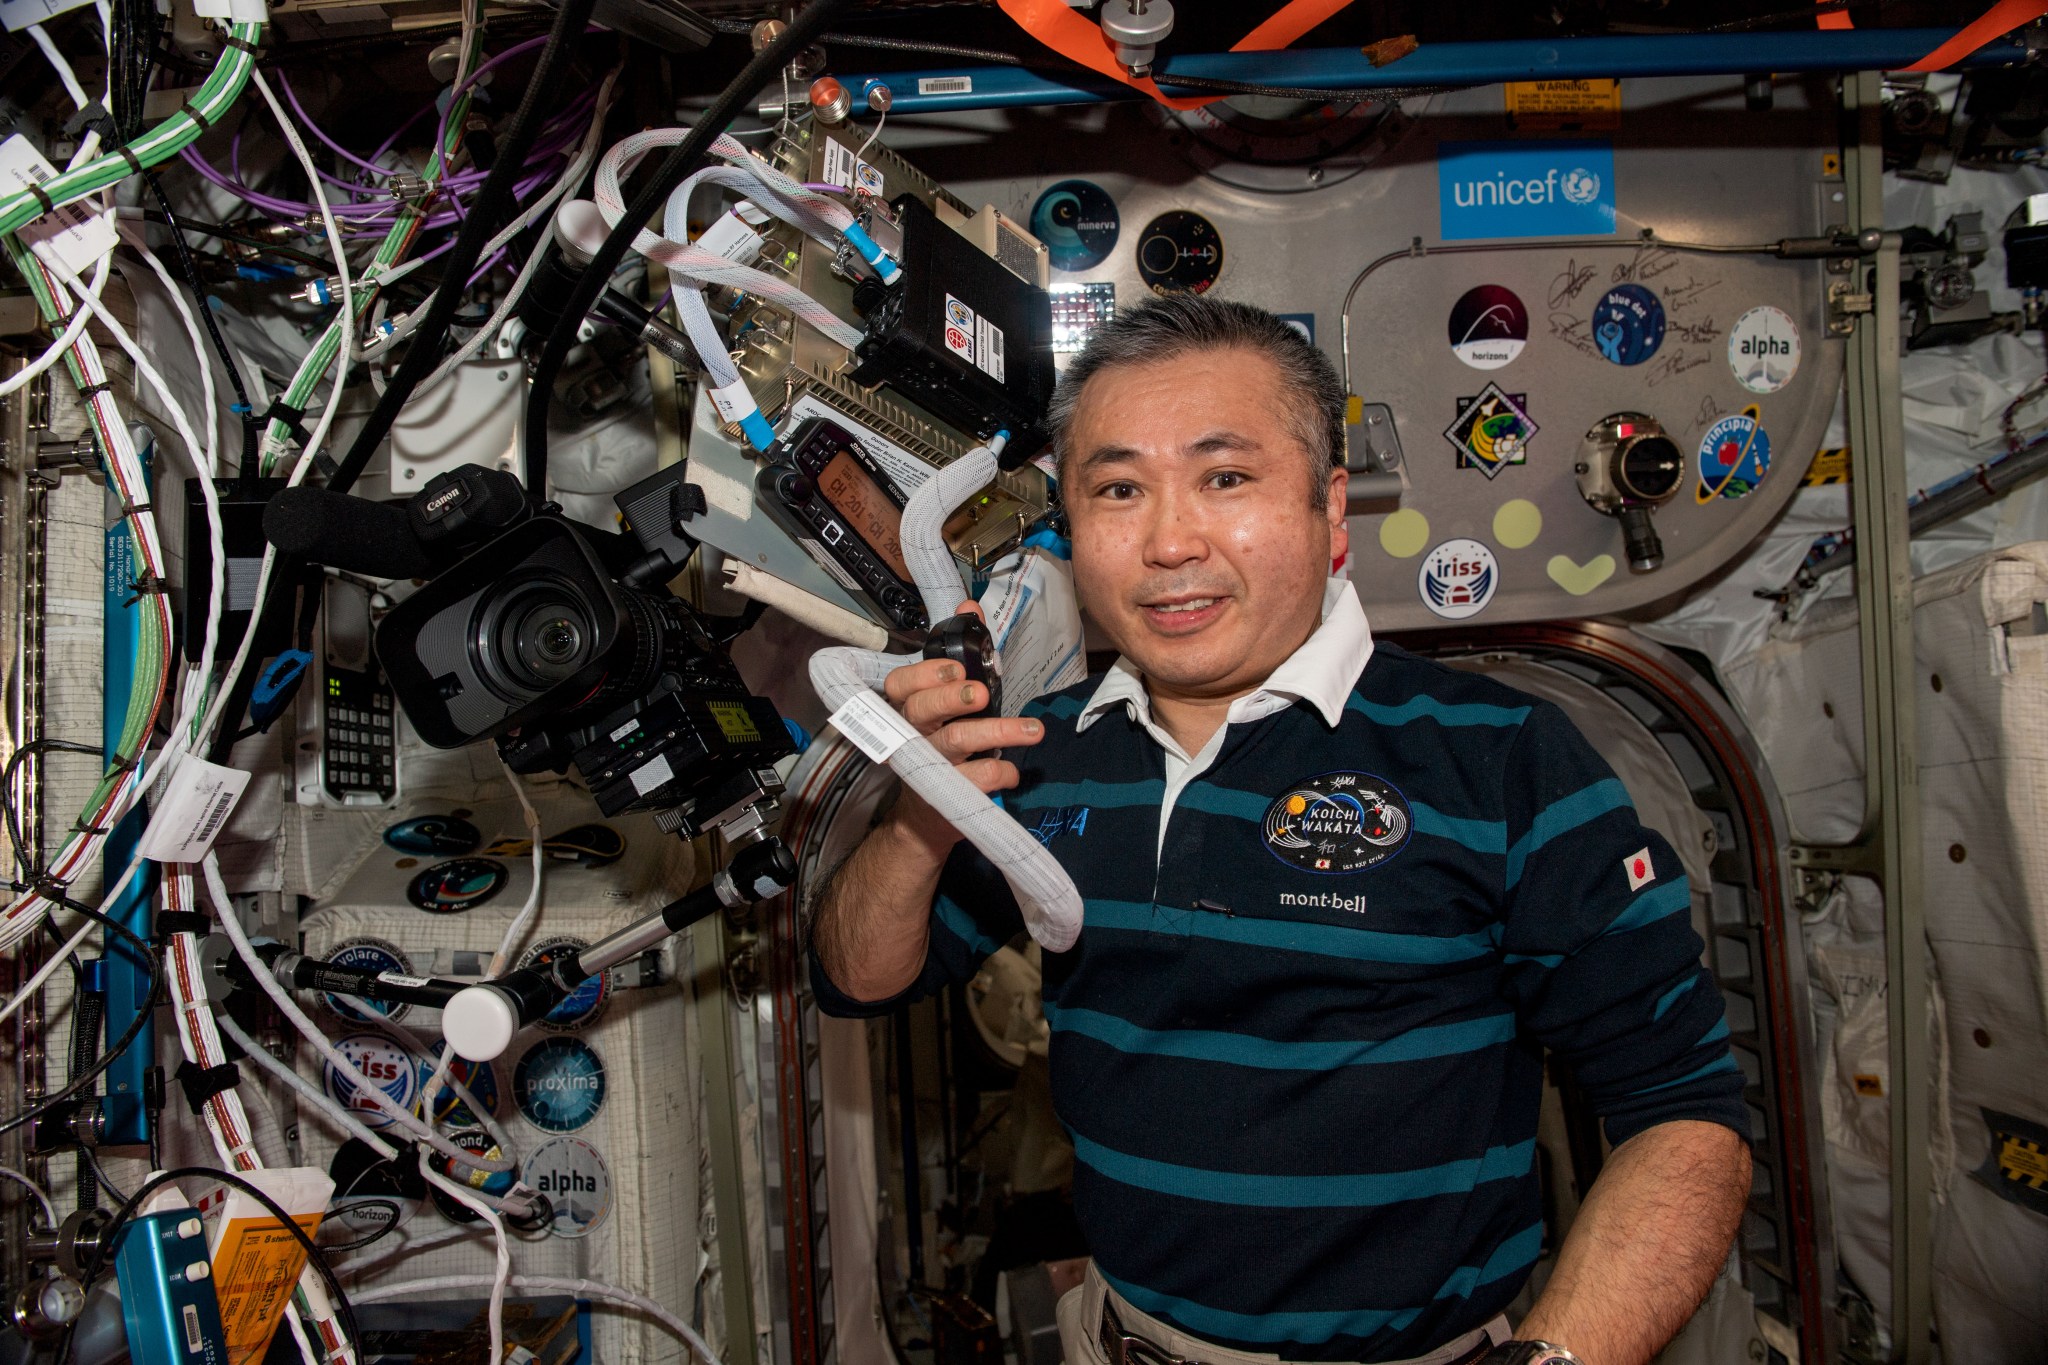 Koichi Wakata, wearing a striped shirt, faces the camera, holding the ham radio mic in his right hand. It is attached by a large grey cable to the radio set above his head. A large camera and tangles of wires are next to him.